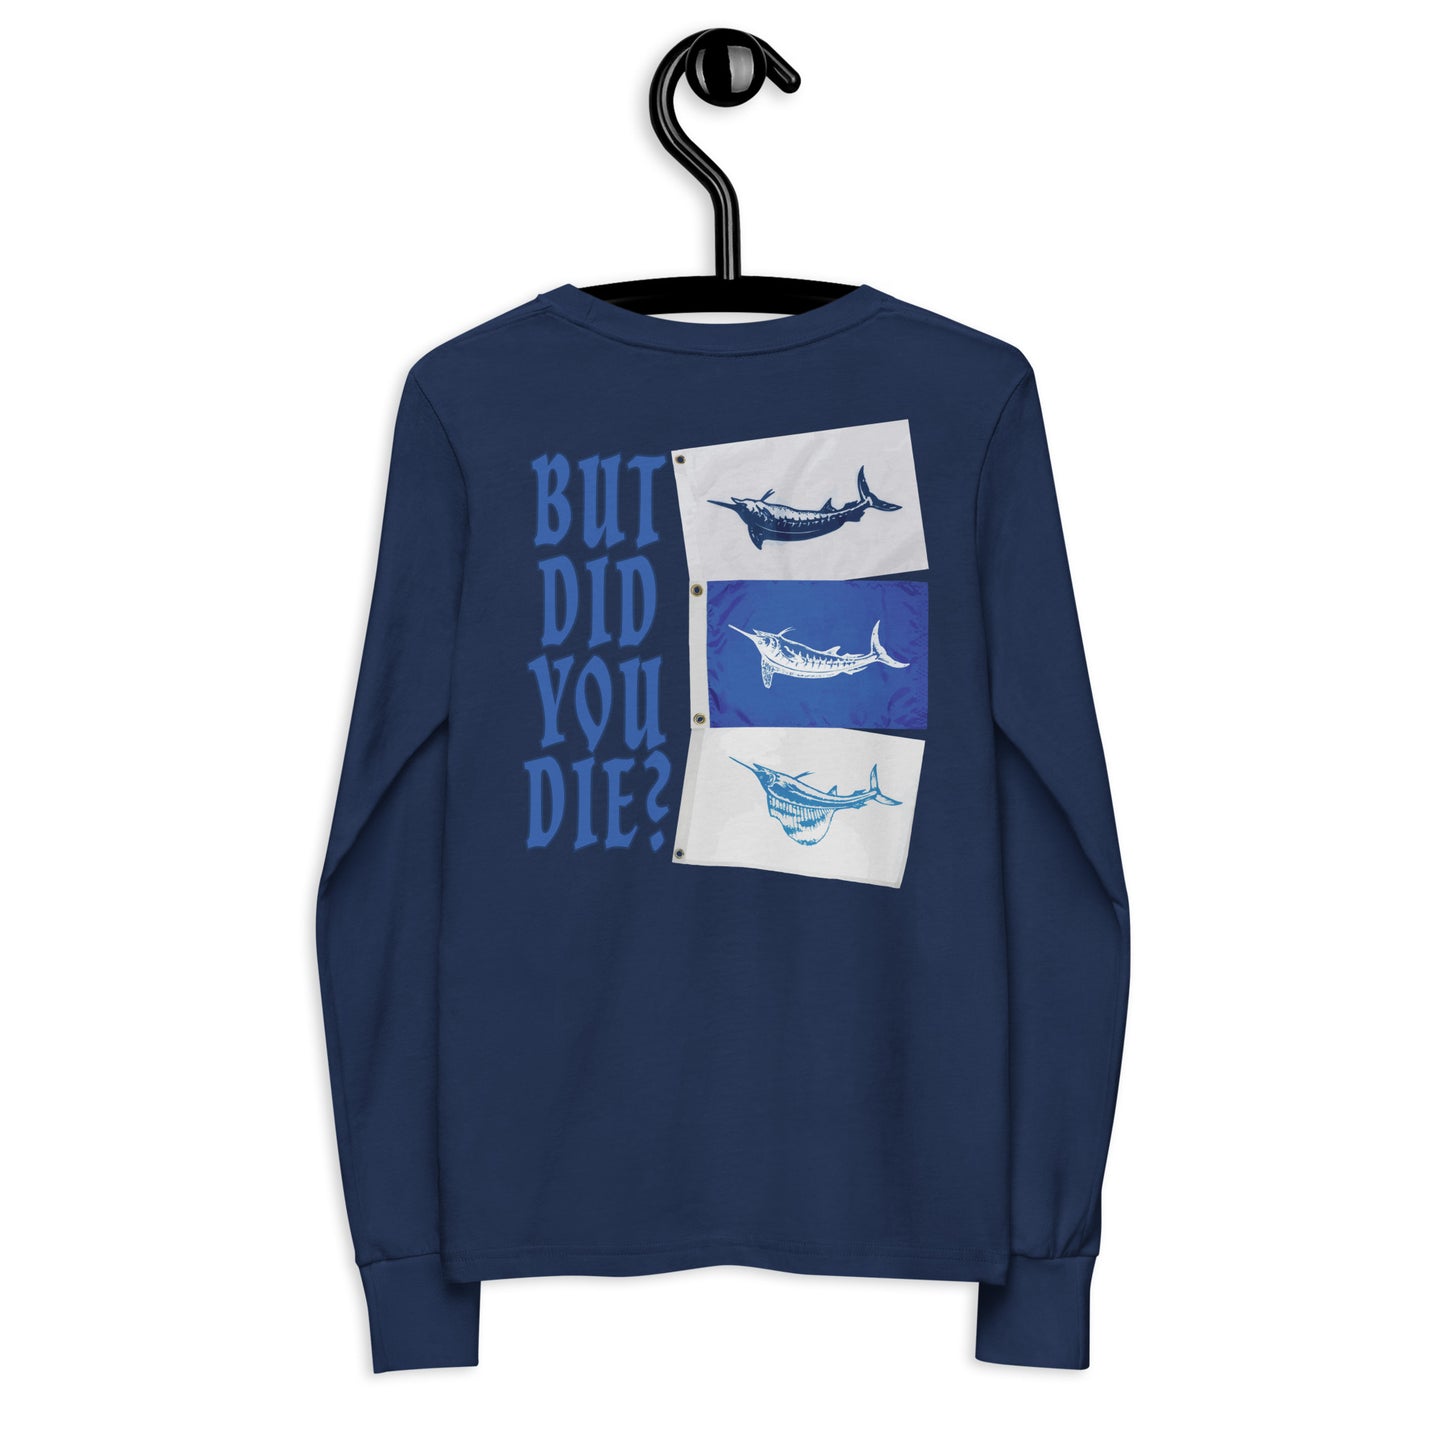 But Did You Die? Youth long sleeve tee